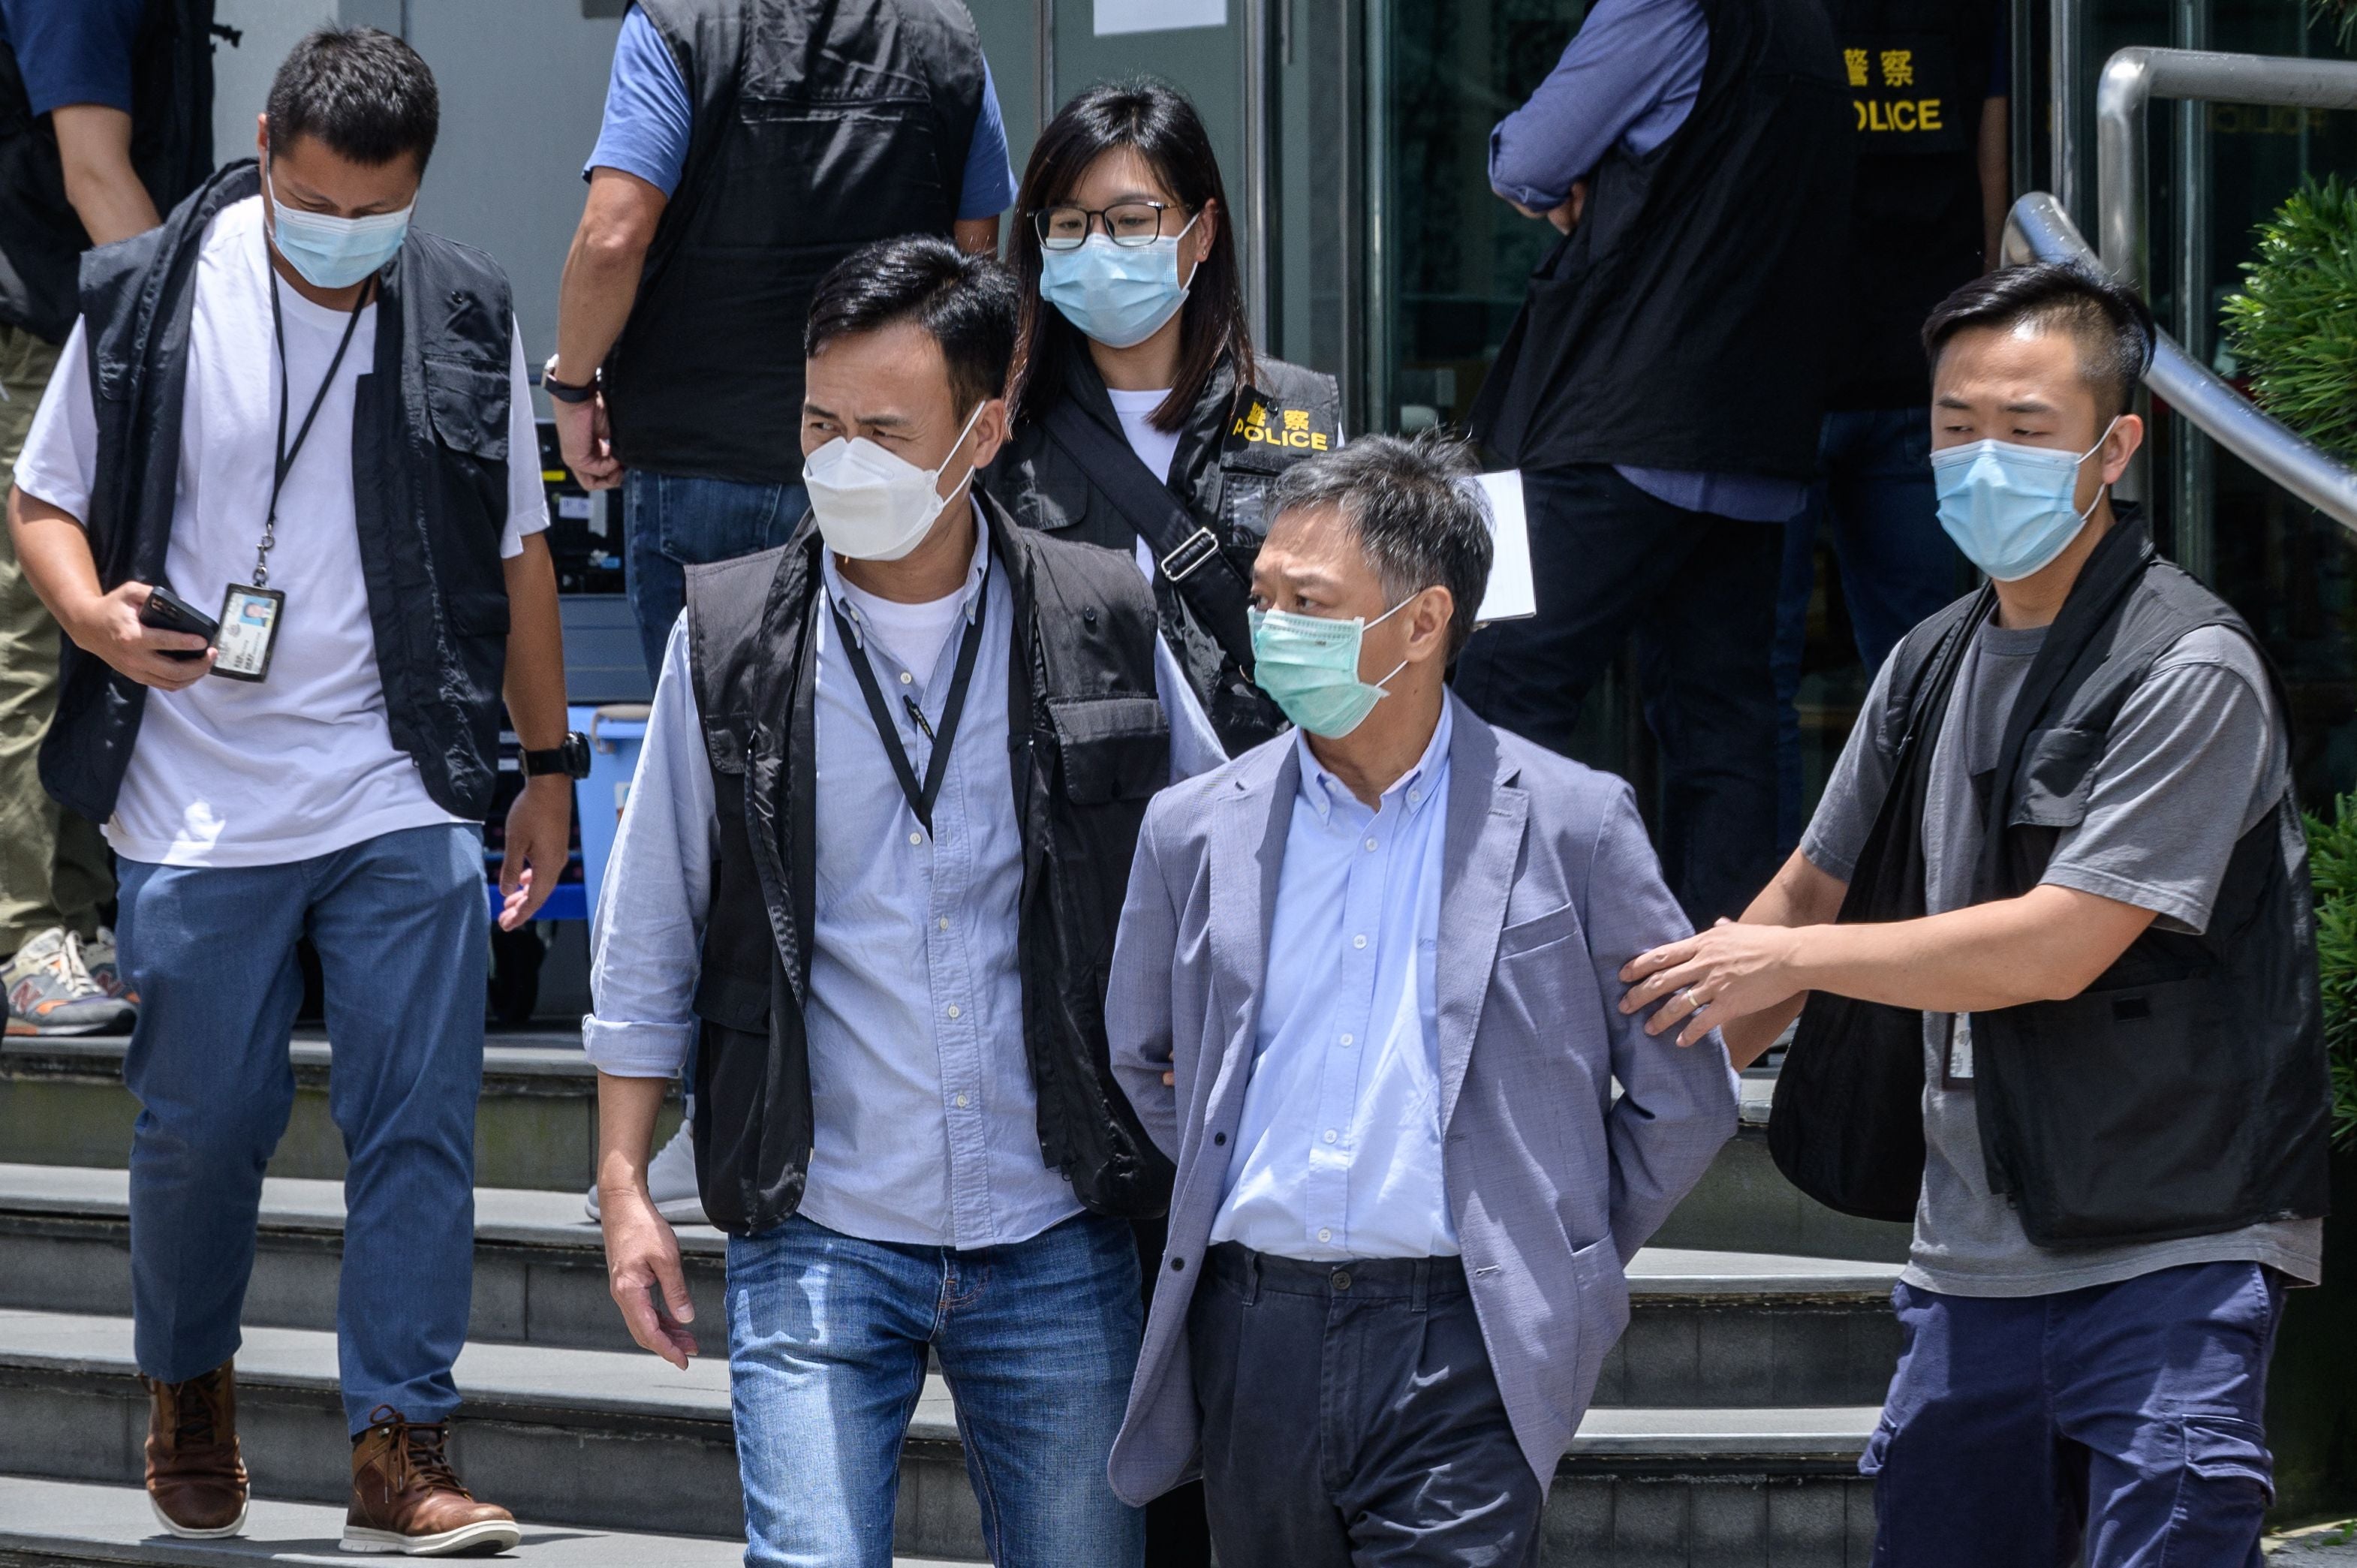 Apple Daily Chief Operations Officer Chow Tat Kuen escorted by police from the Apple Daily offices